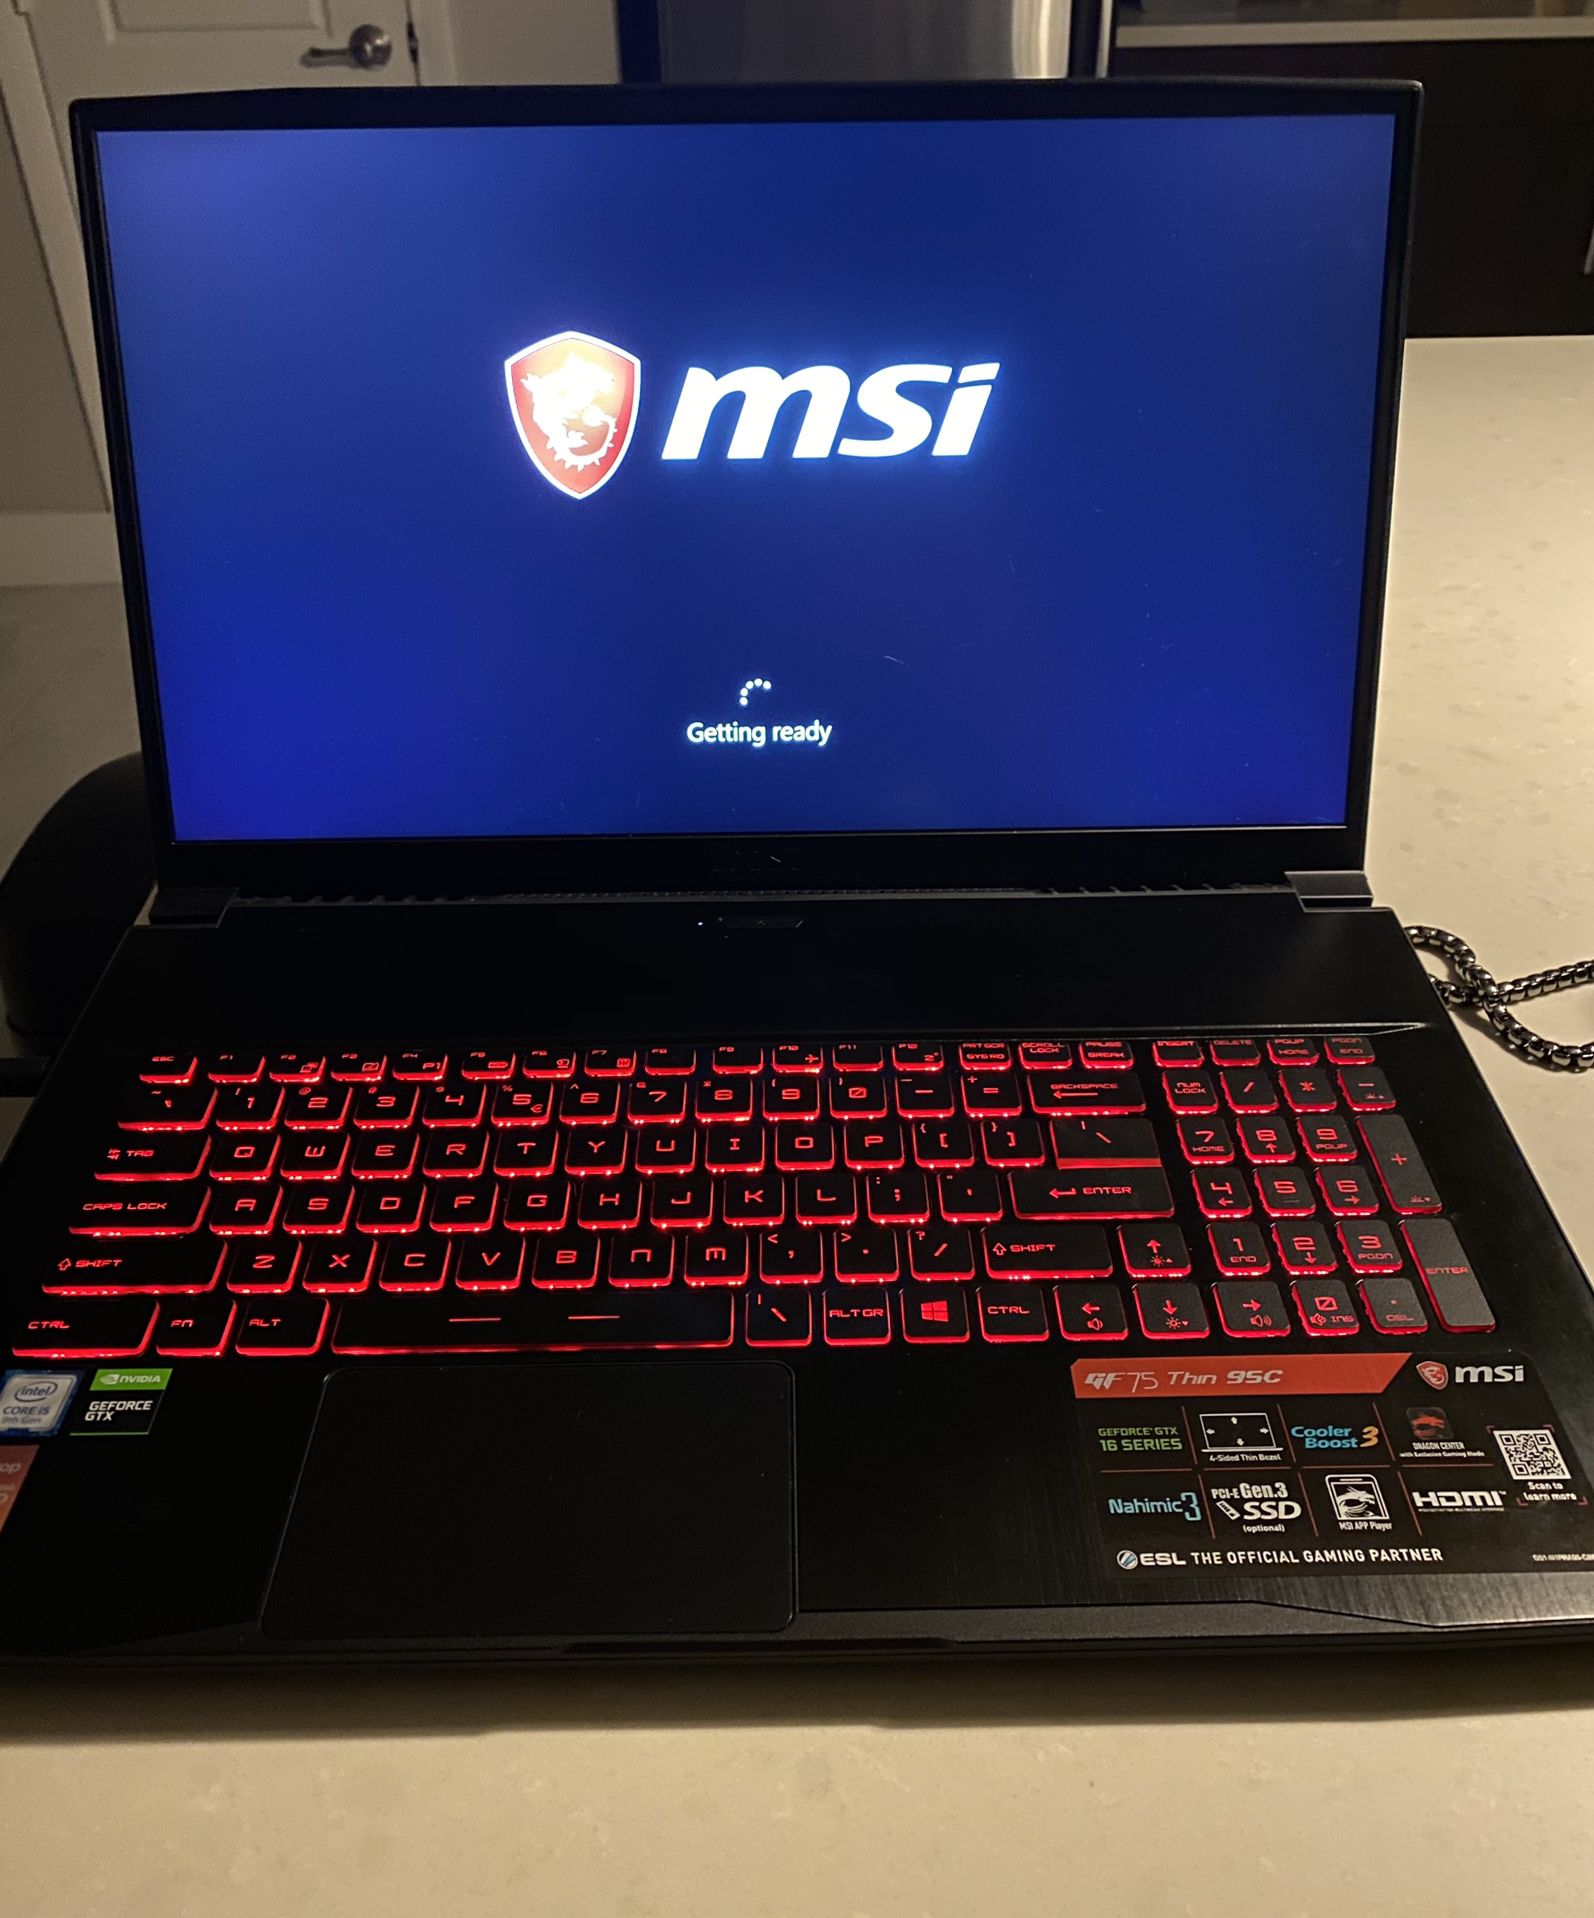 MSI Gaming Laptop 17.3 Inch Display 8 GB RAM 2.4 GHz Processor i5 Intel Core *MINT CONDITION*